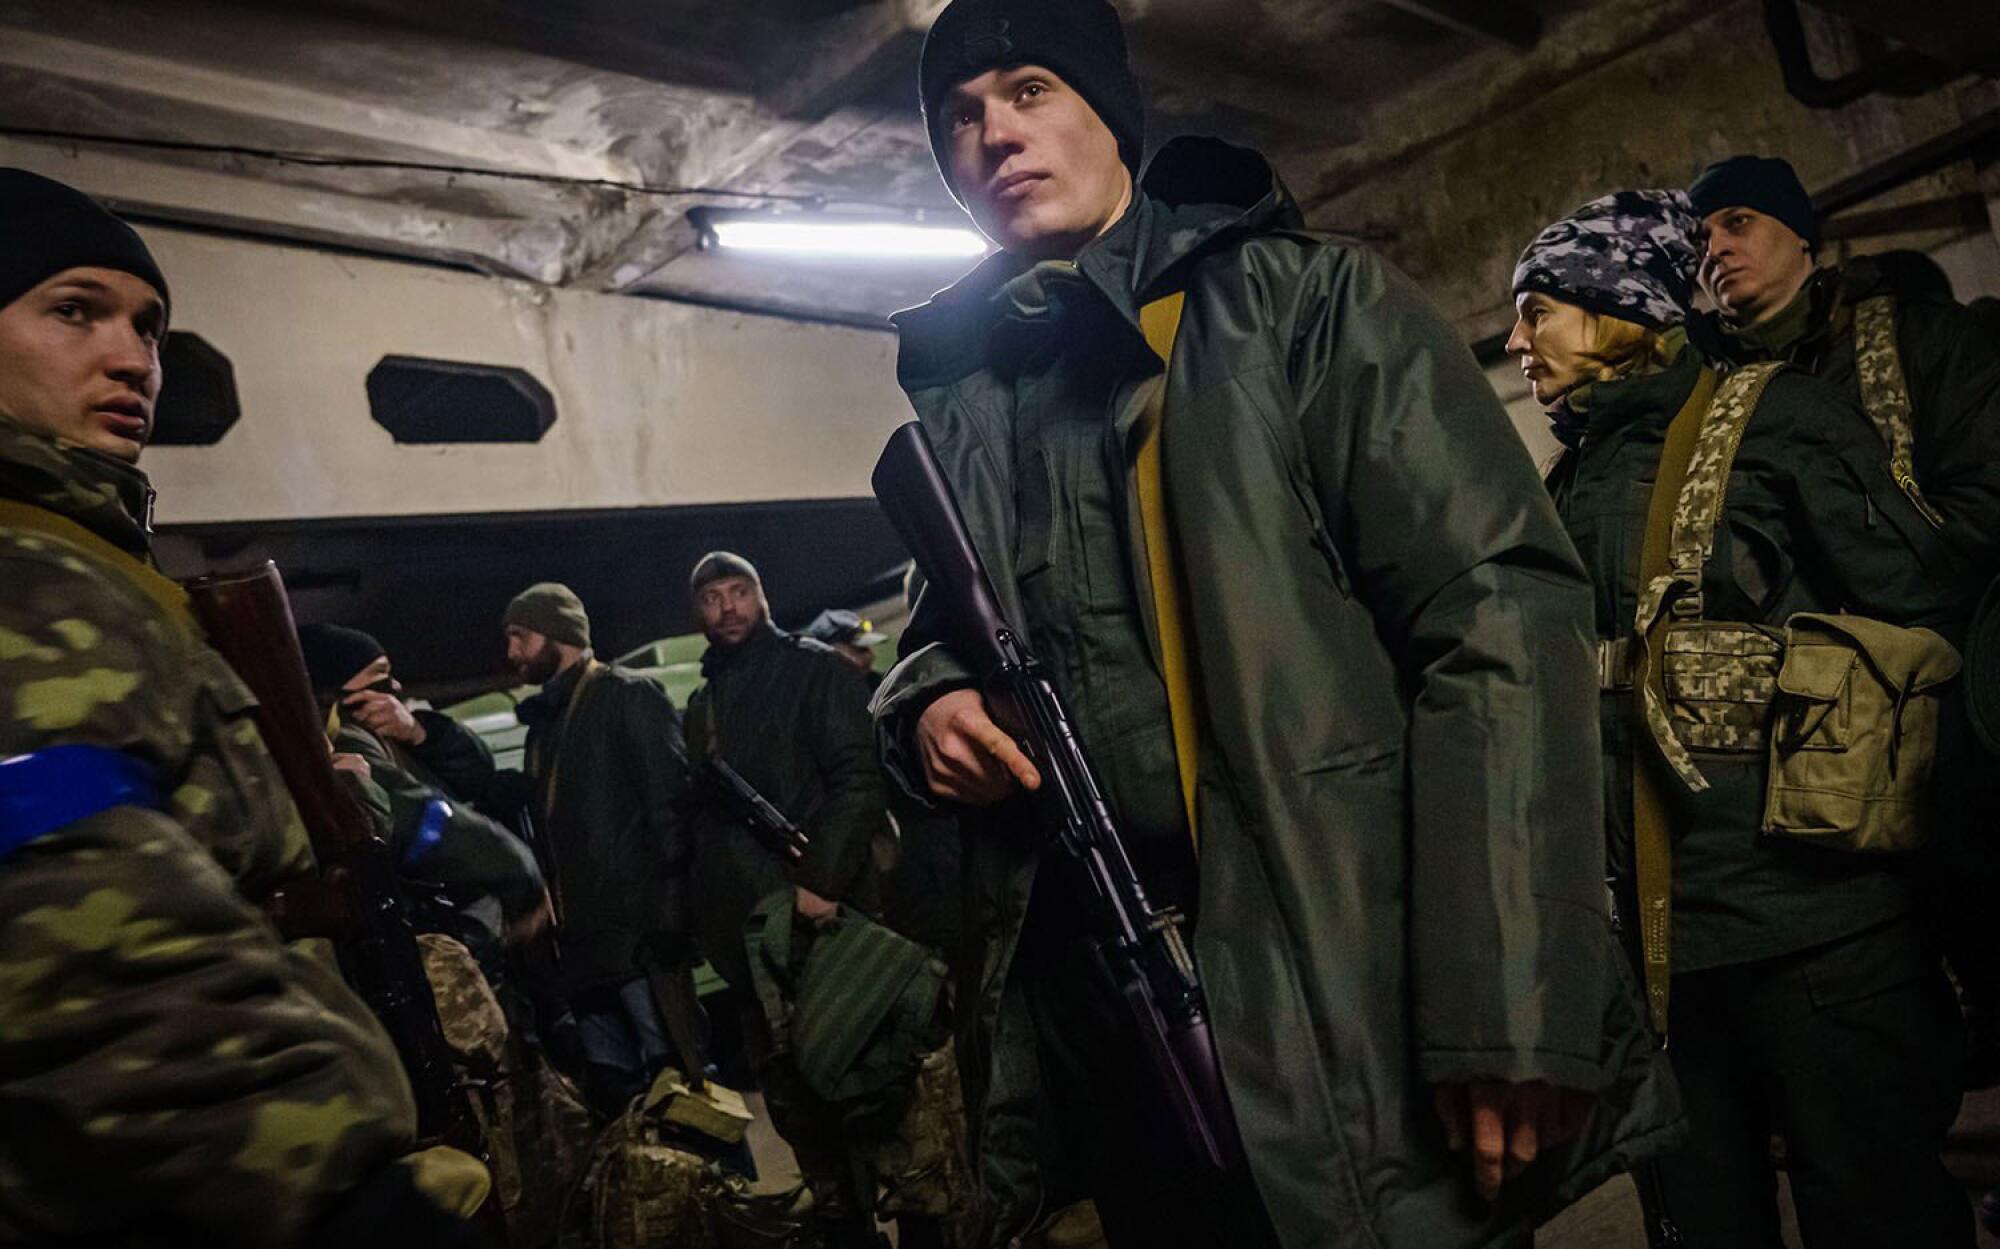 A man in a black beanie and green coat holding a rifle, surrounded by other armed men and women.